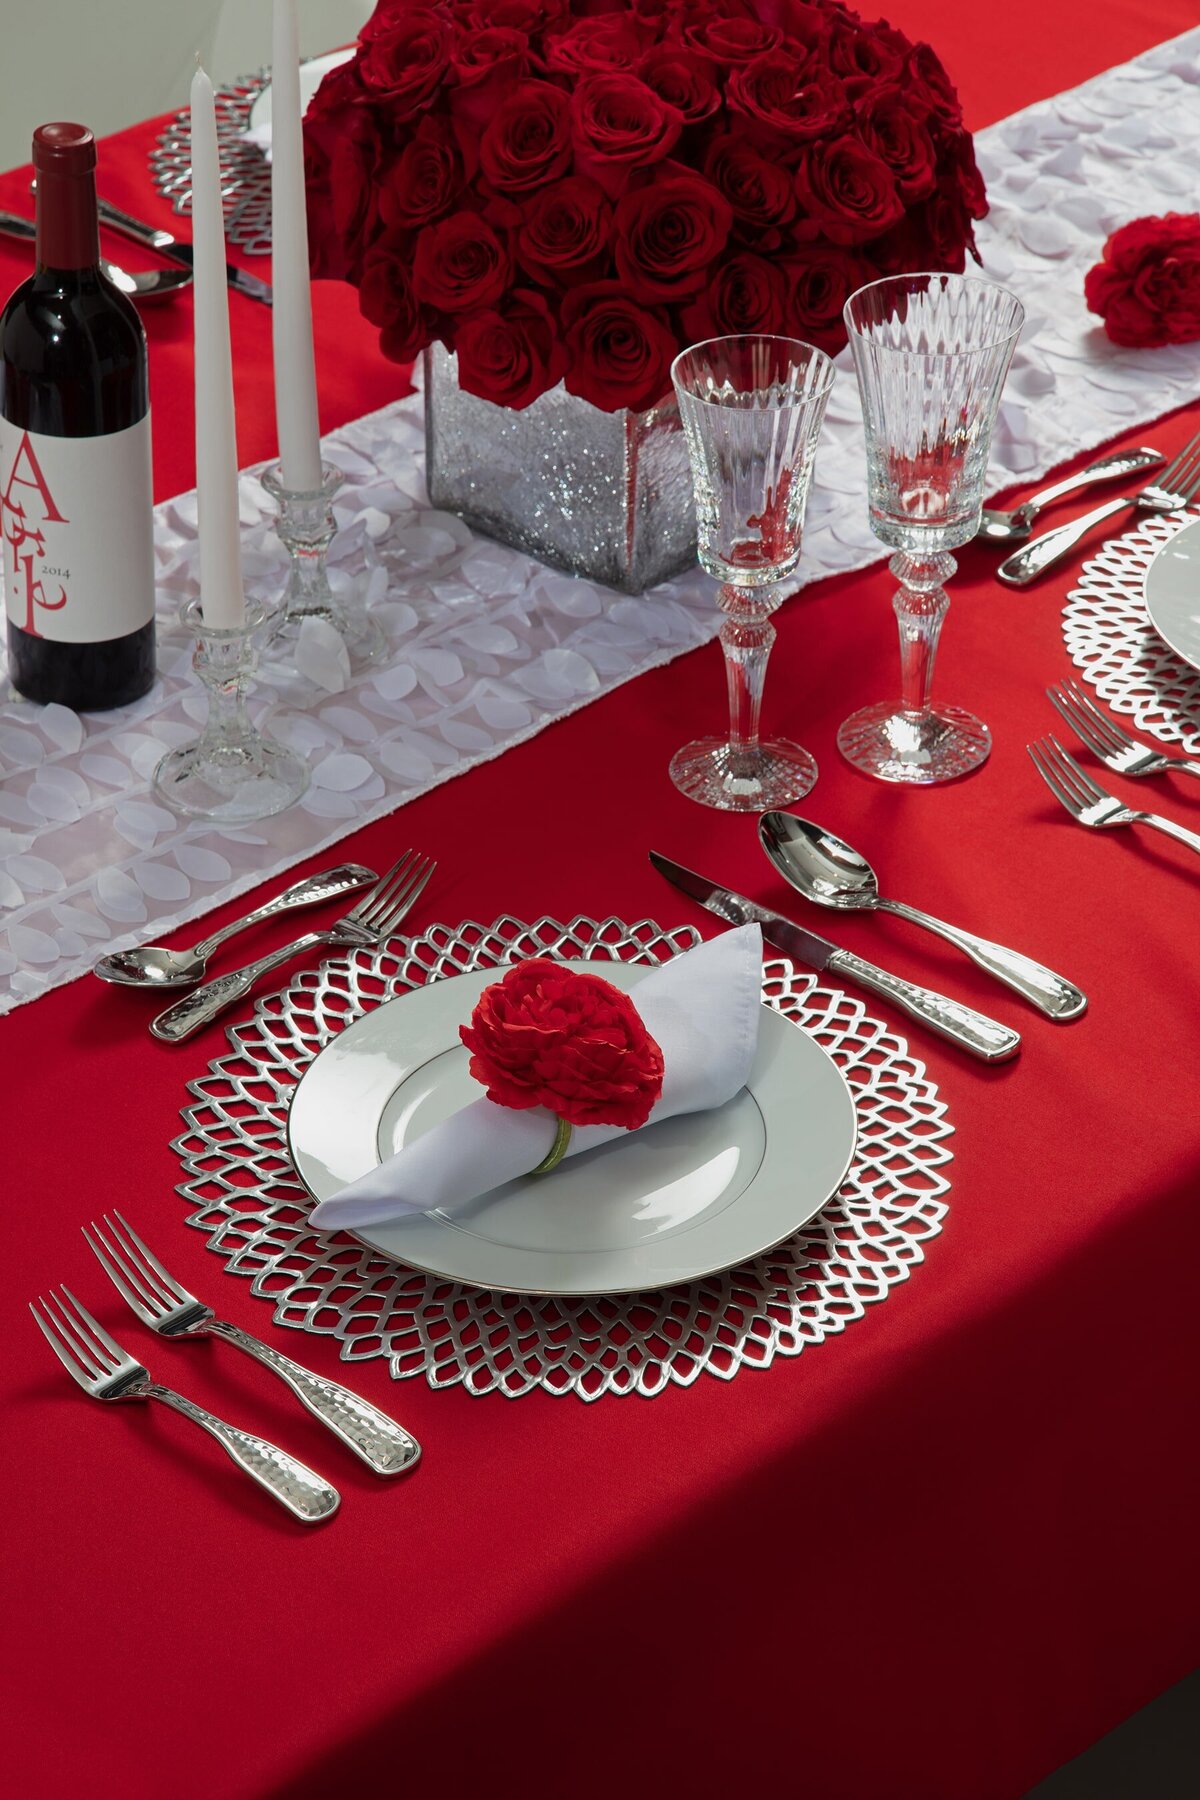 Angies-Tables-will-you-be-mine-valentines-tablescape-kit-2